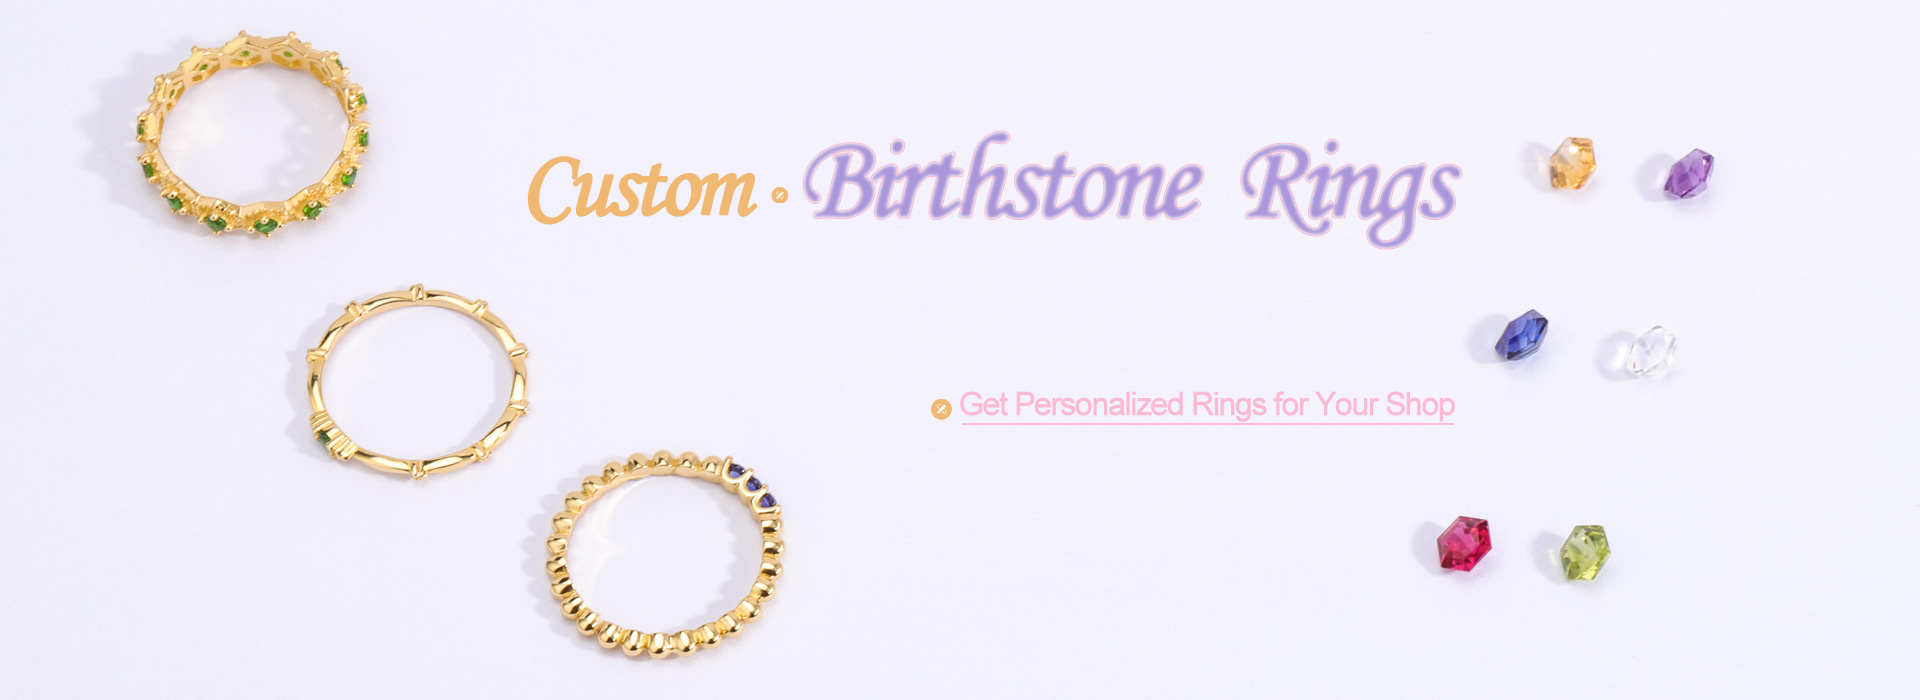 custom birthstone rings, personalized birthstone rings, china jewelry manufacturers